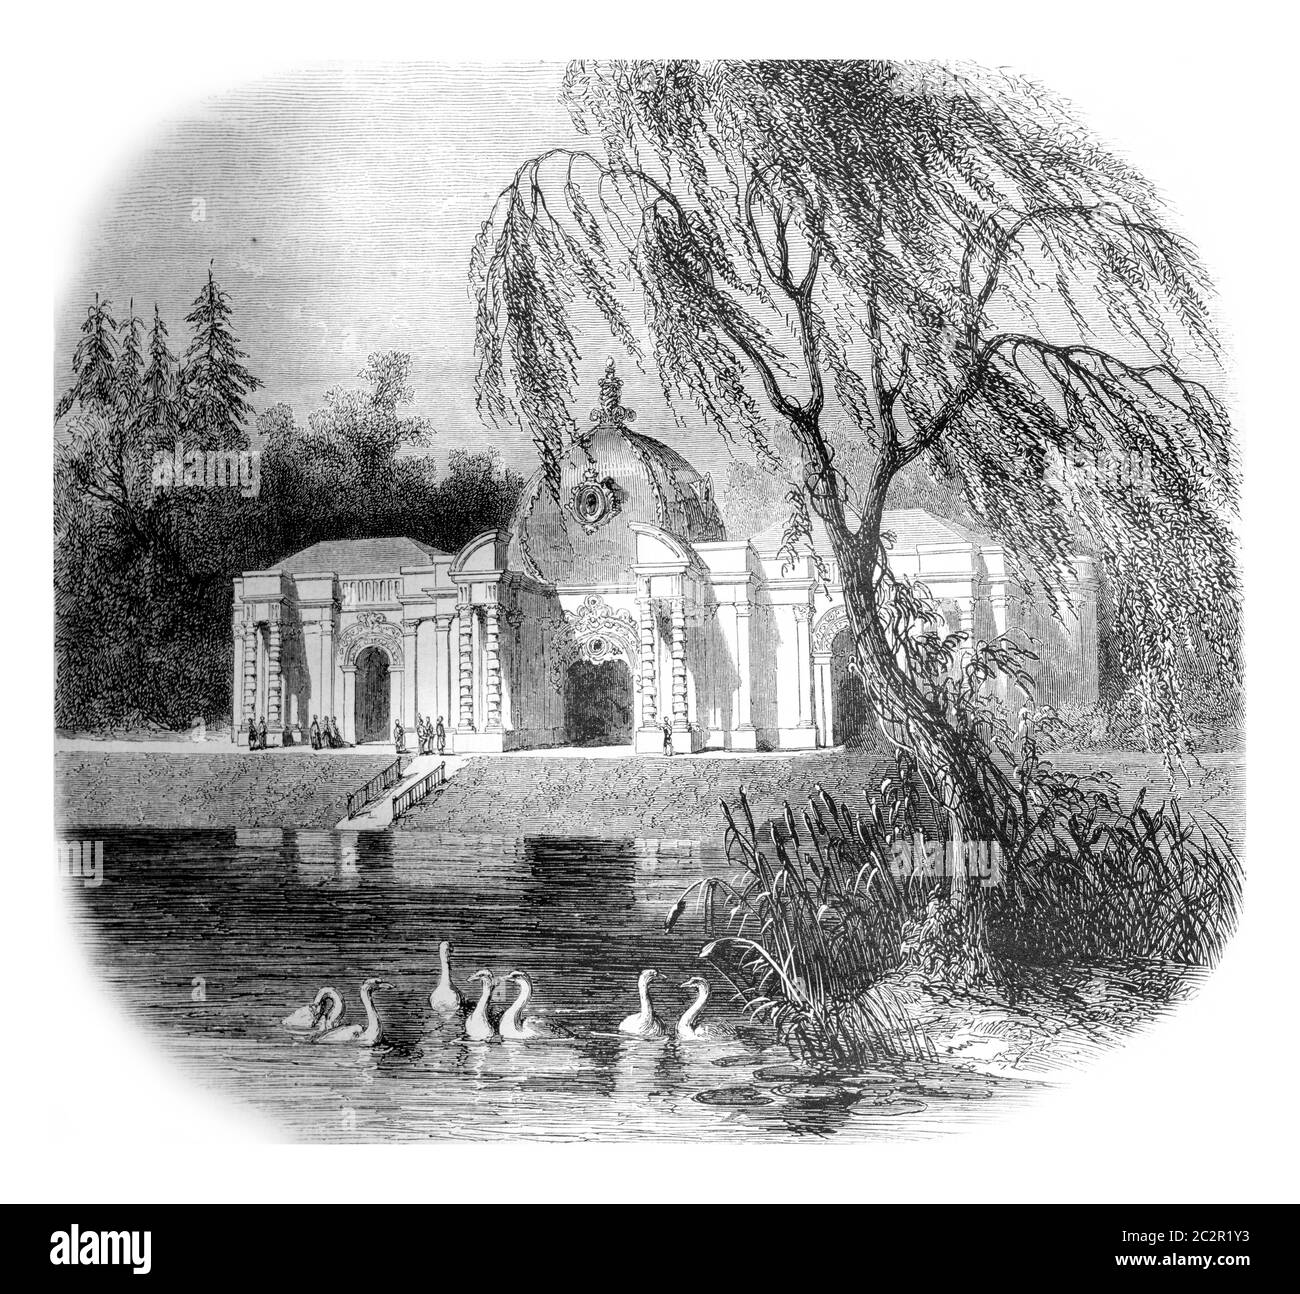 Catherine Booth II in Tsarskoye Selo, vintage engraved illustration. Magasin Pittoresque 1861. Stock Photo